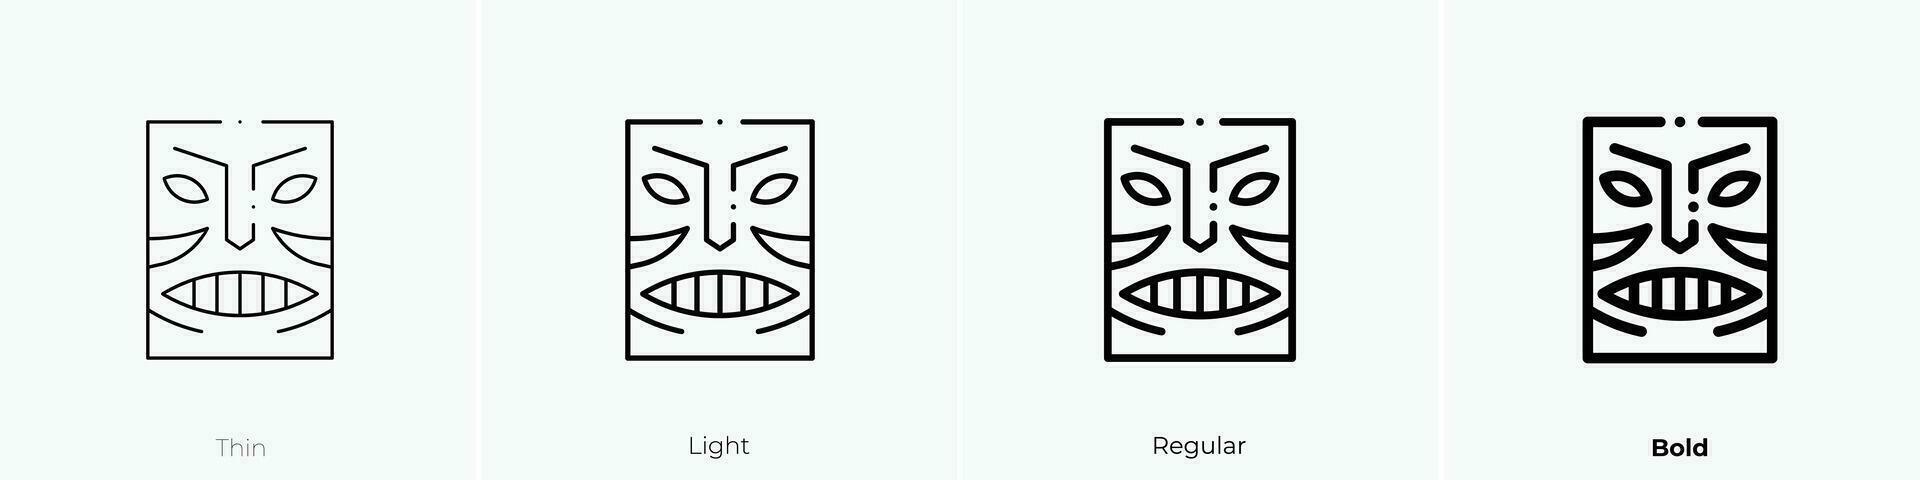 tiki icon. Thin, Light, Regular And Bold style design isolated on white background vector